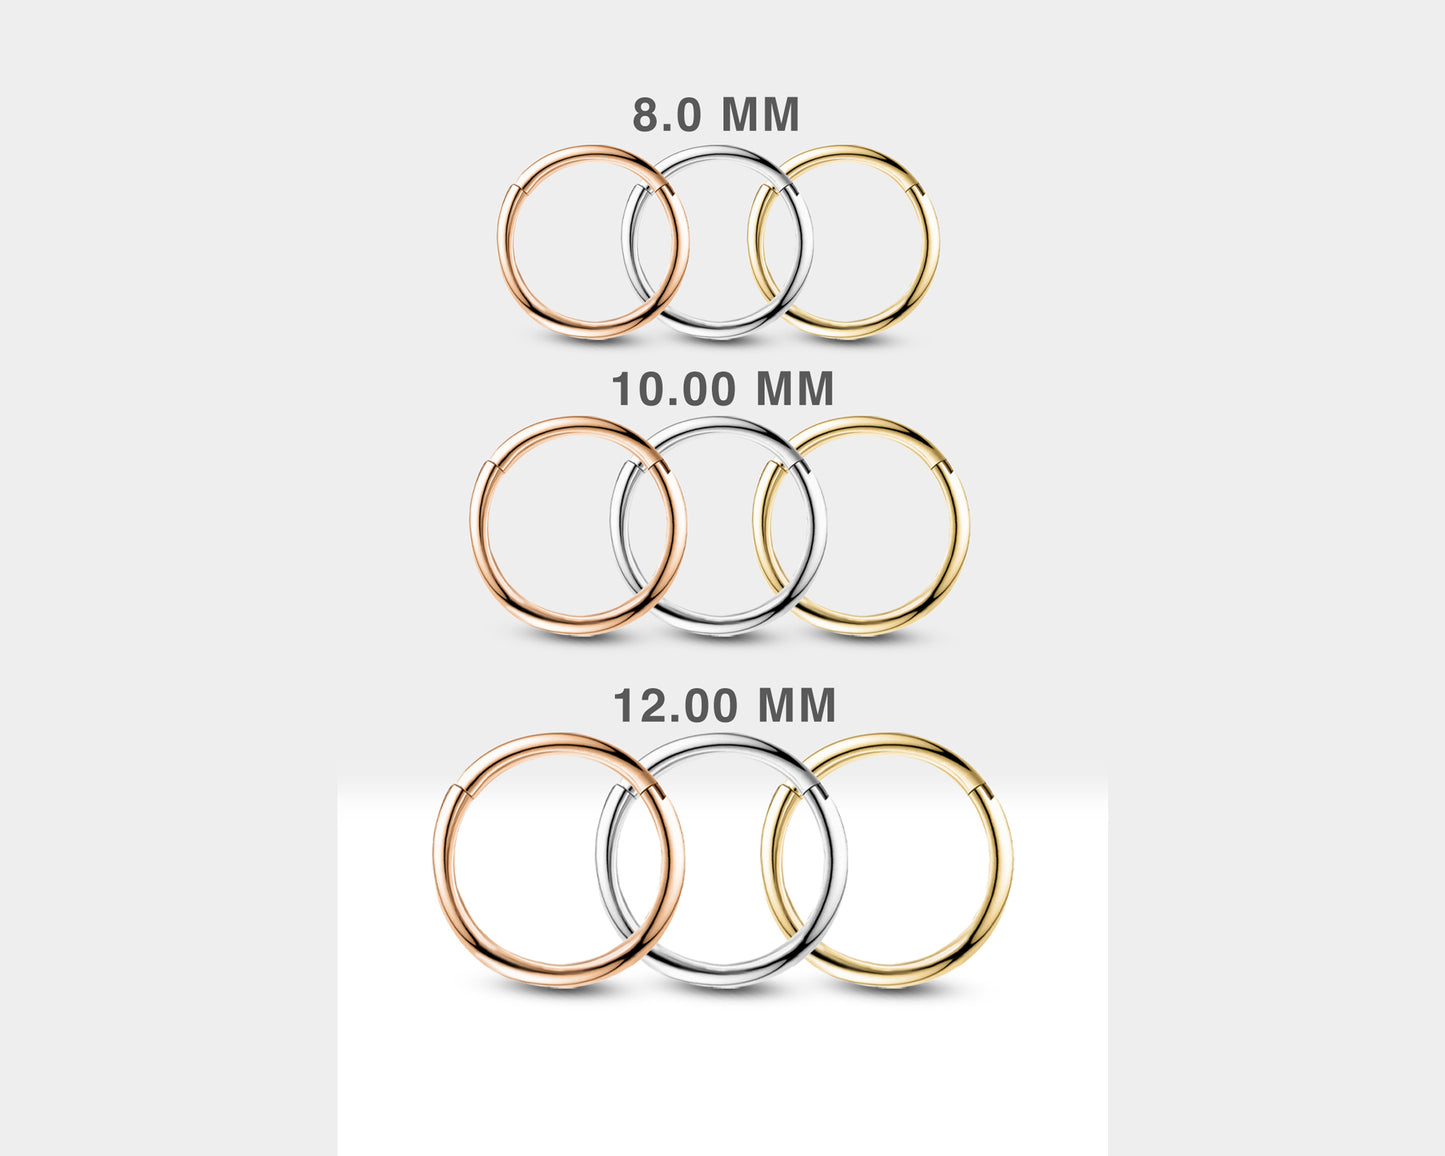 Single Clicker Earring Gold Cartilage Hoop Small 14K Gold